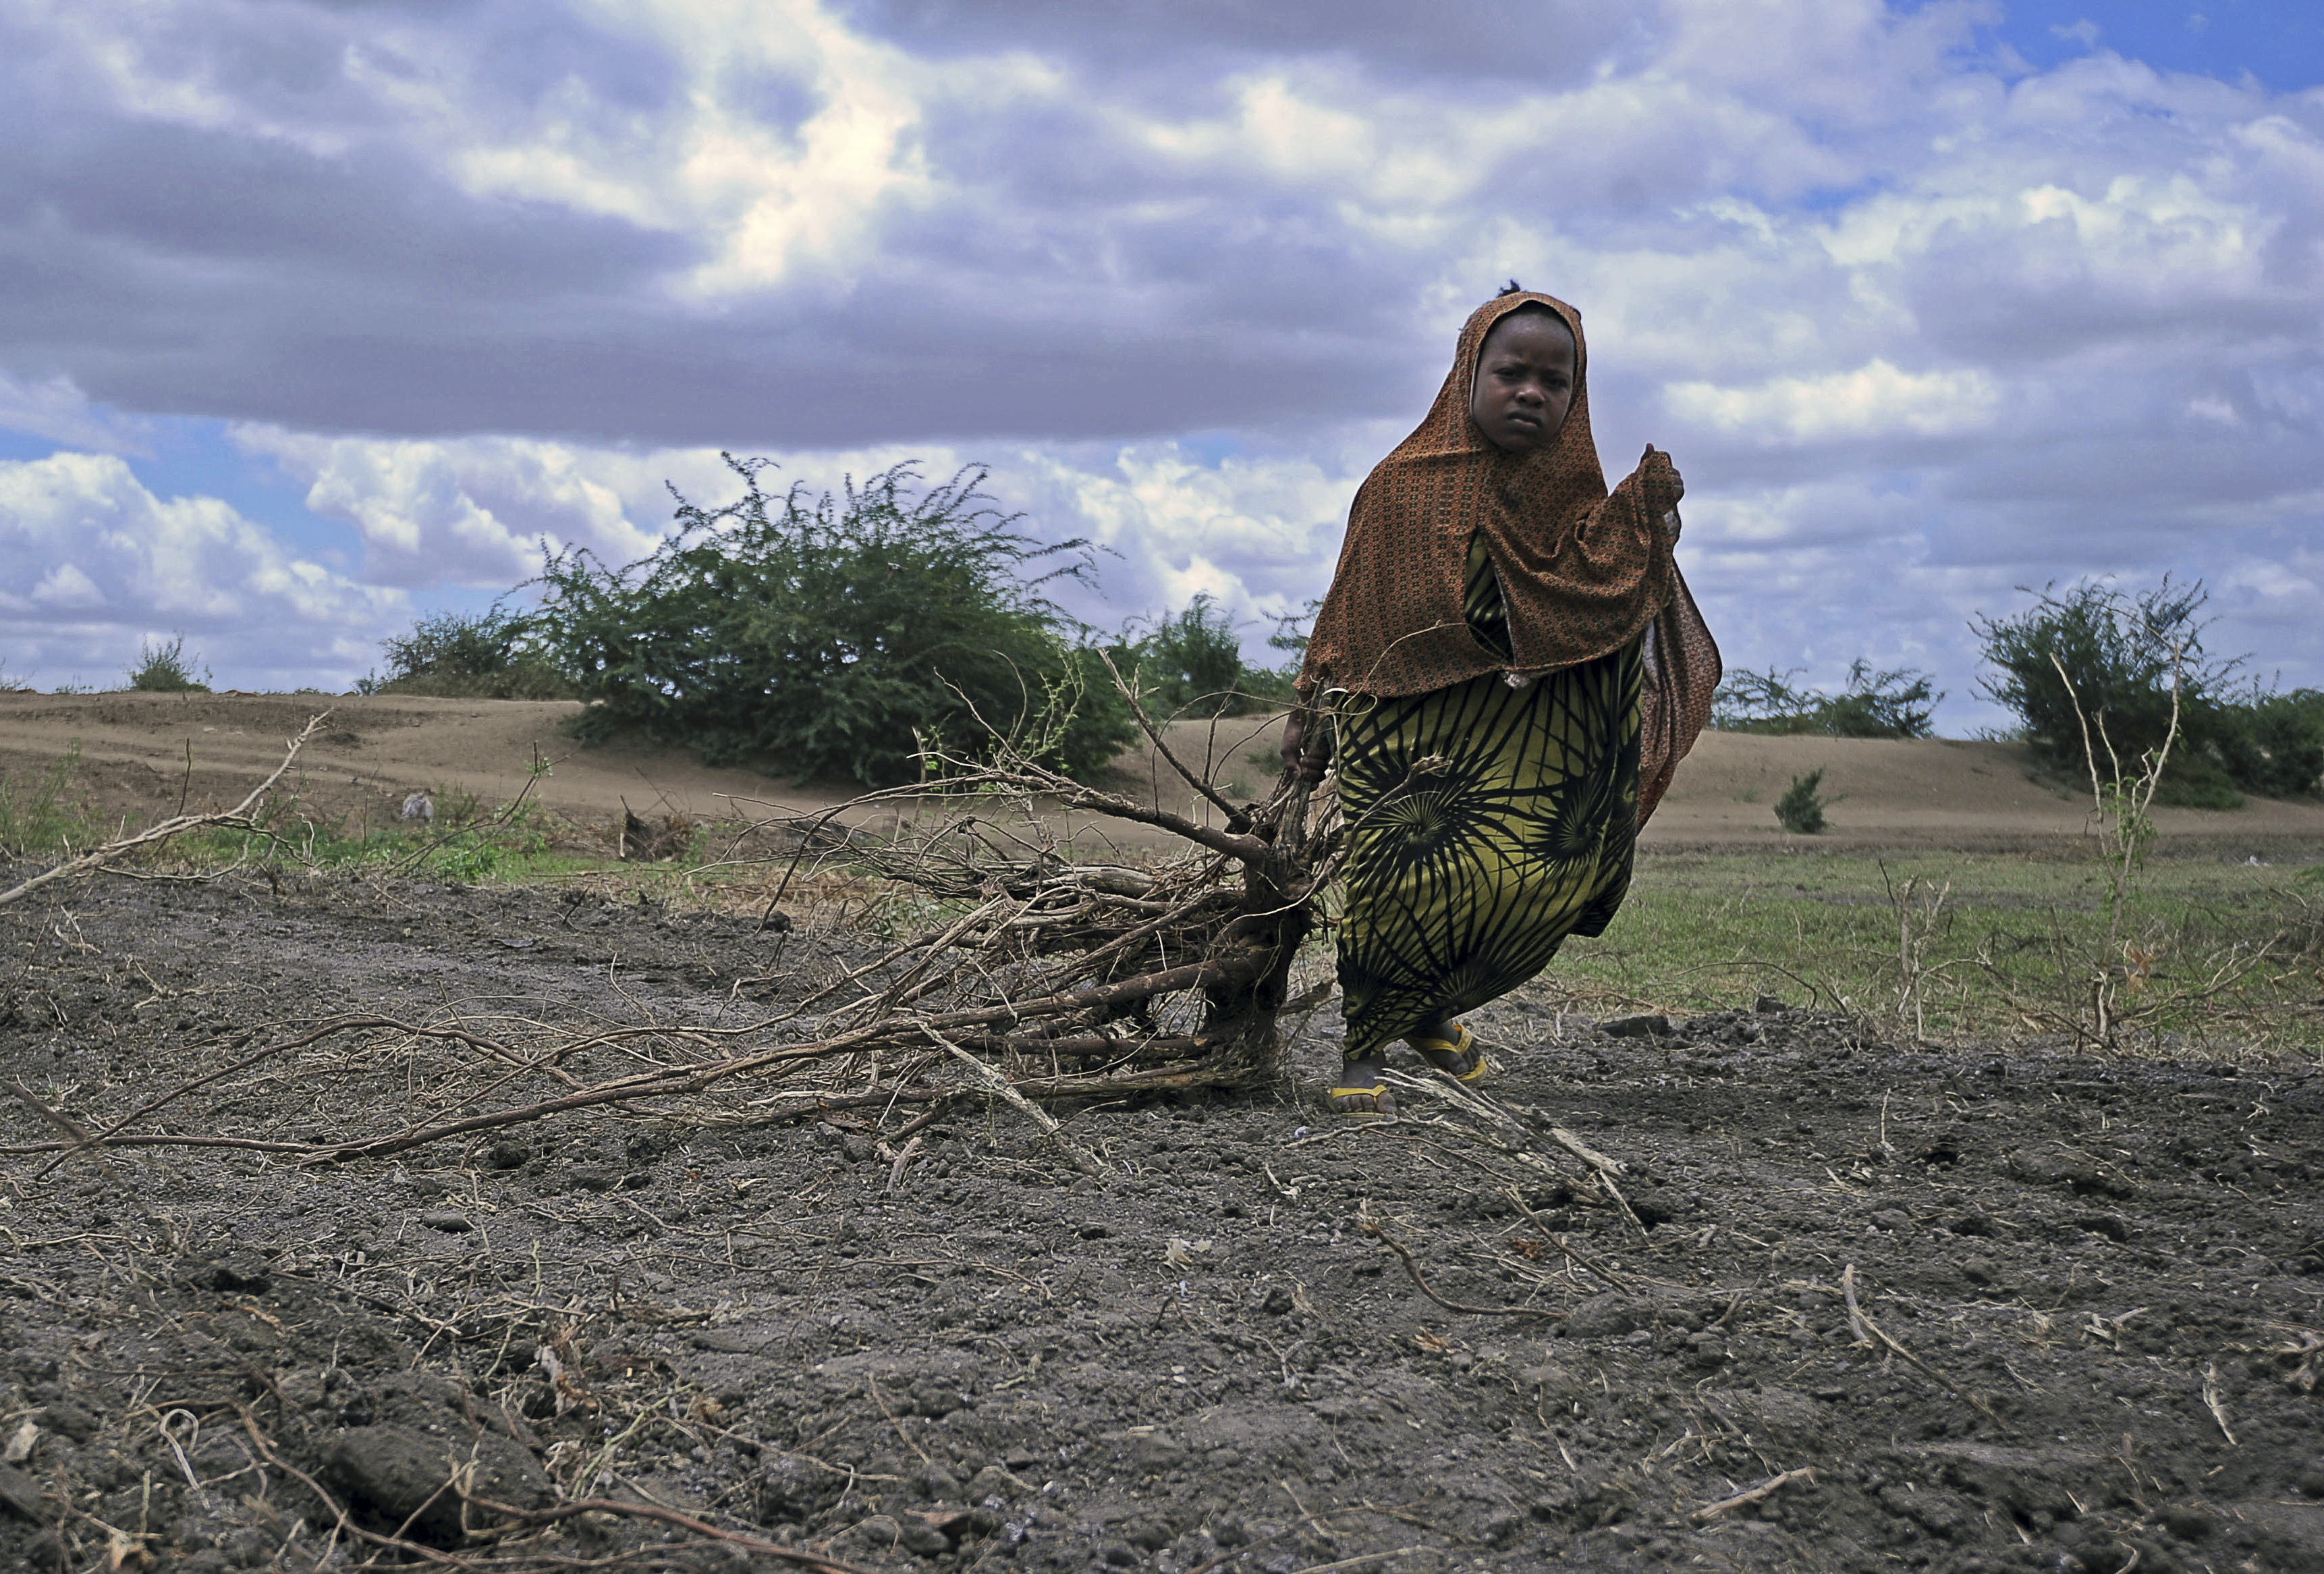 A Somali girl drags bundles of firewood for use as fuel for cooking on October 8,2015 in Jowhar town, some 90km north of the Somalis capital Mogadishu. AFP PHOTO/MOHAMED ABDIWAHAB